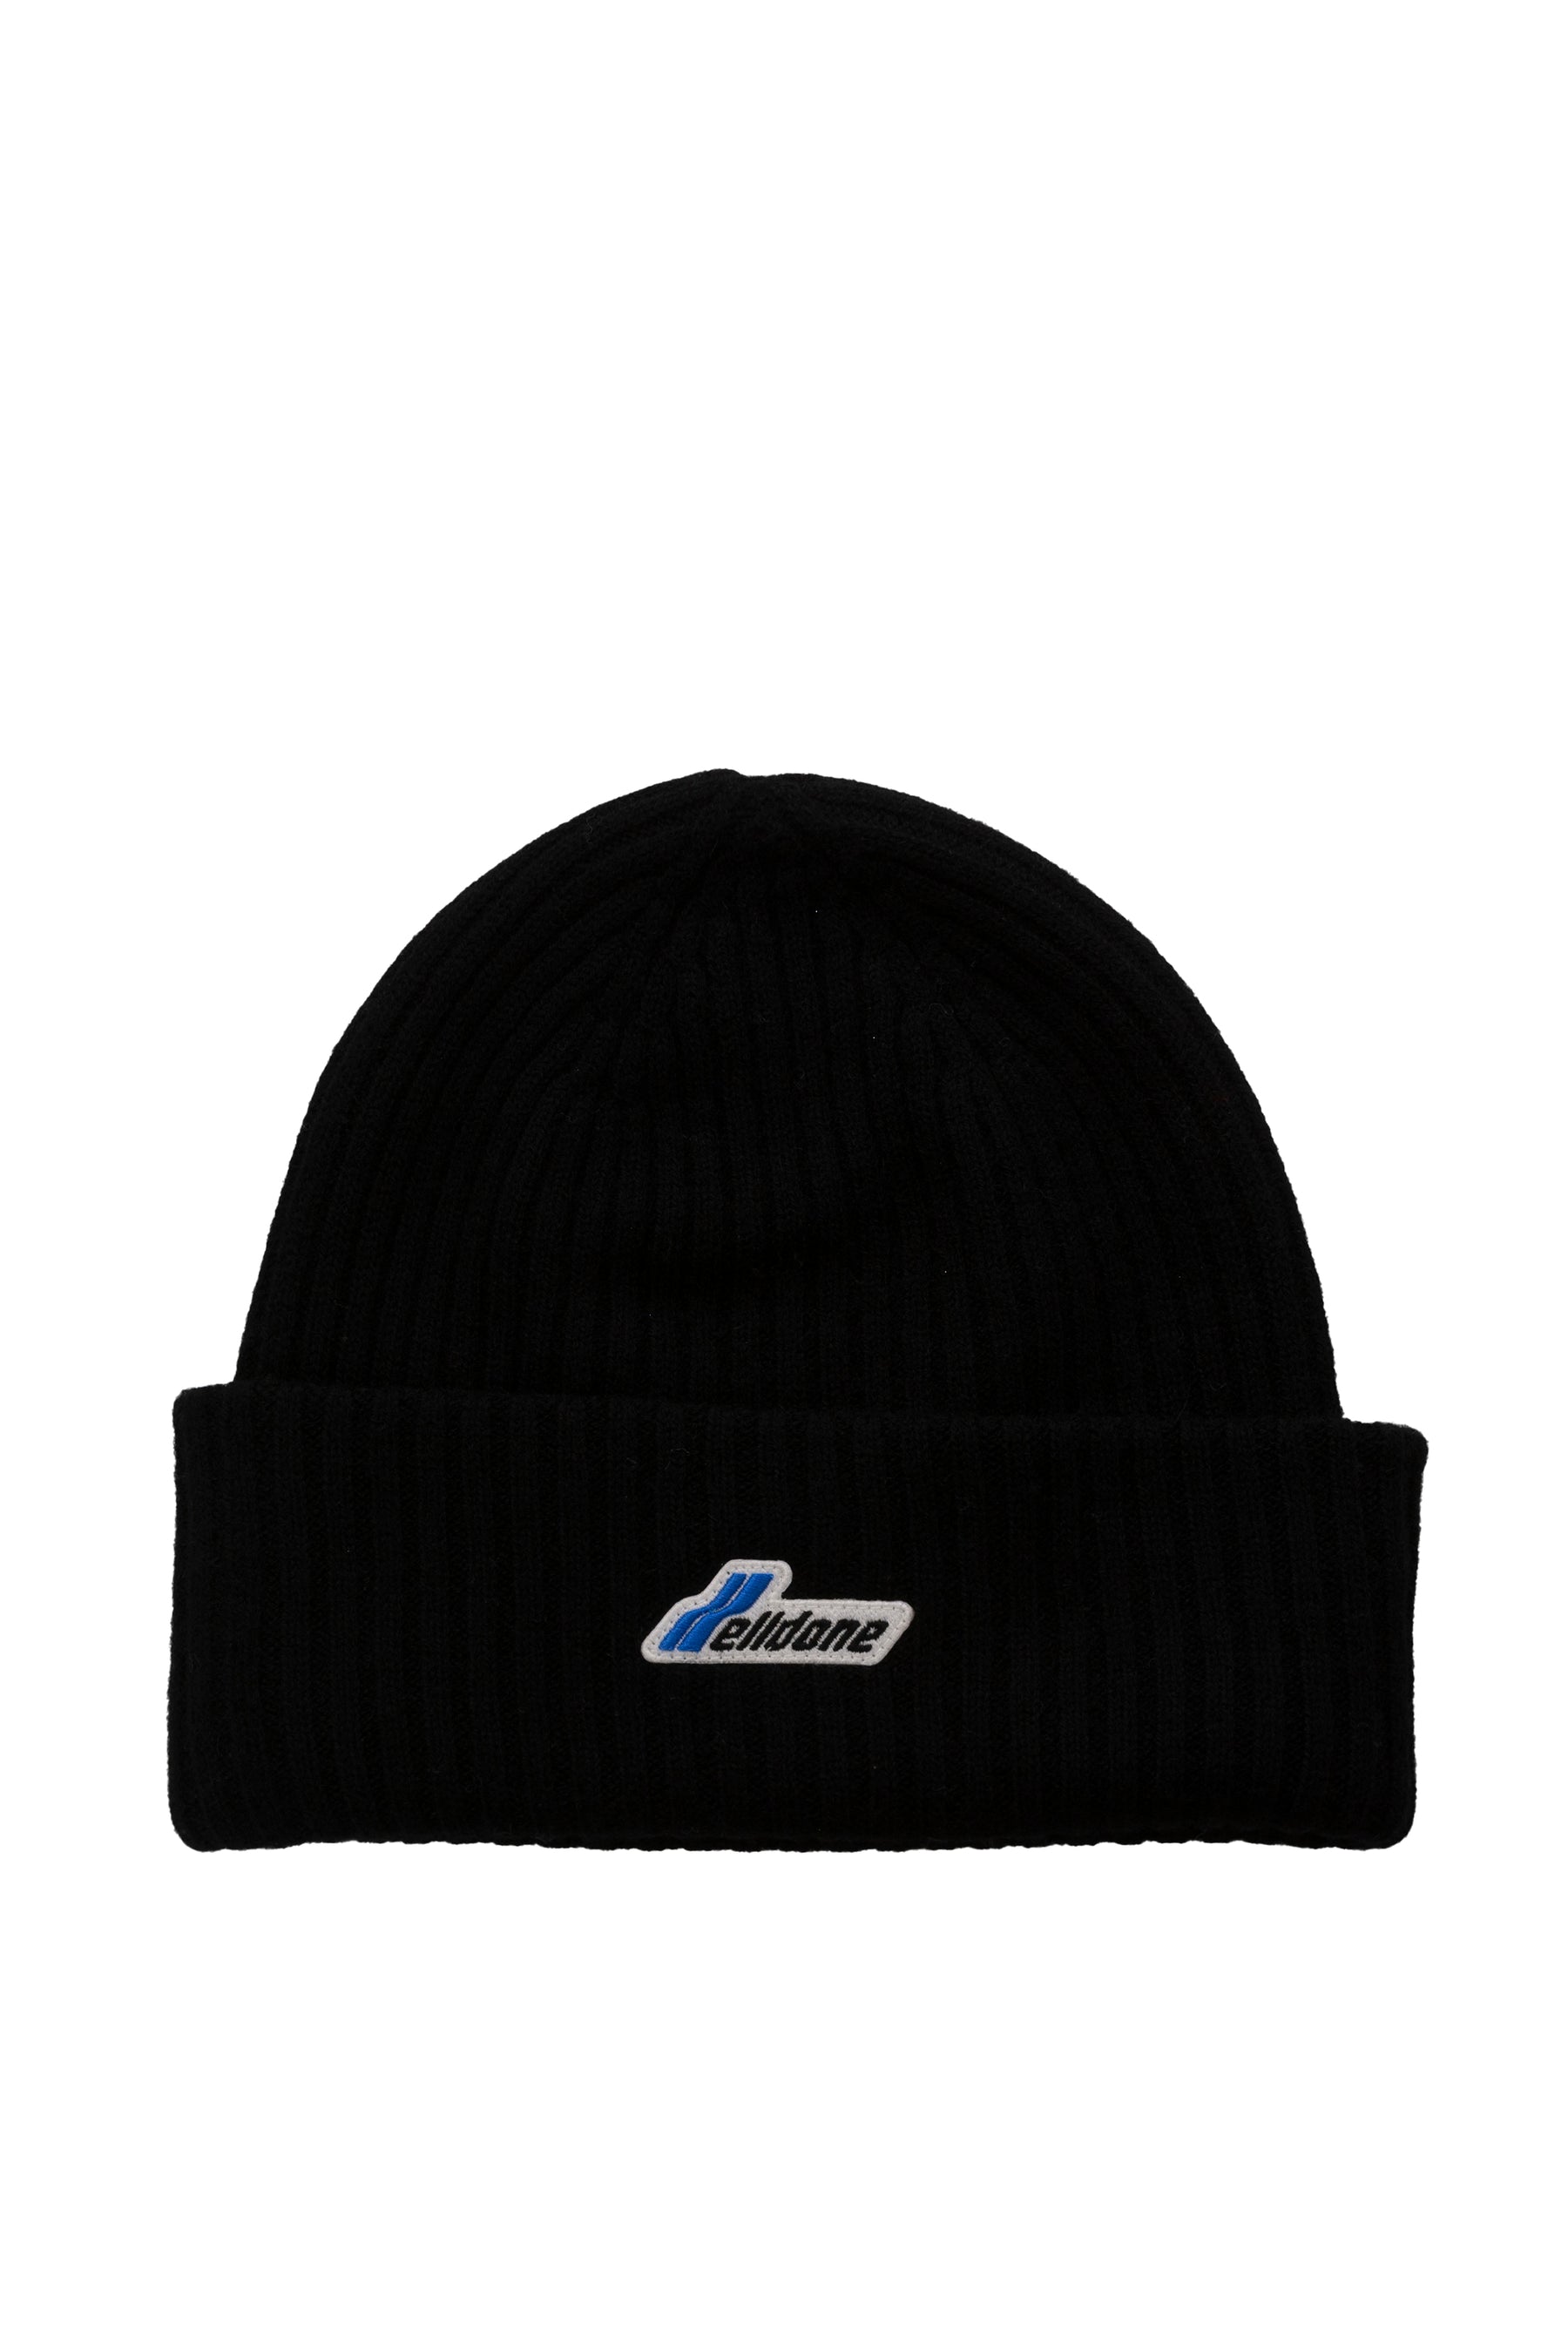 WE11DONE ウェルダン FW23 BLACK LOGO PATCHED KNIT BEANIE / BLK -NUBIAN